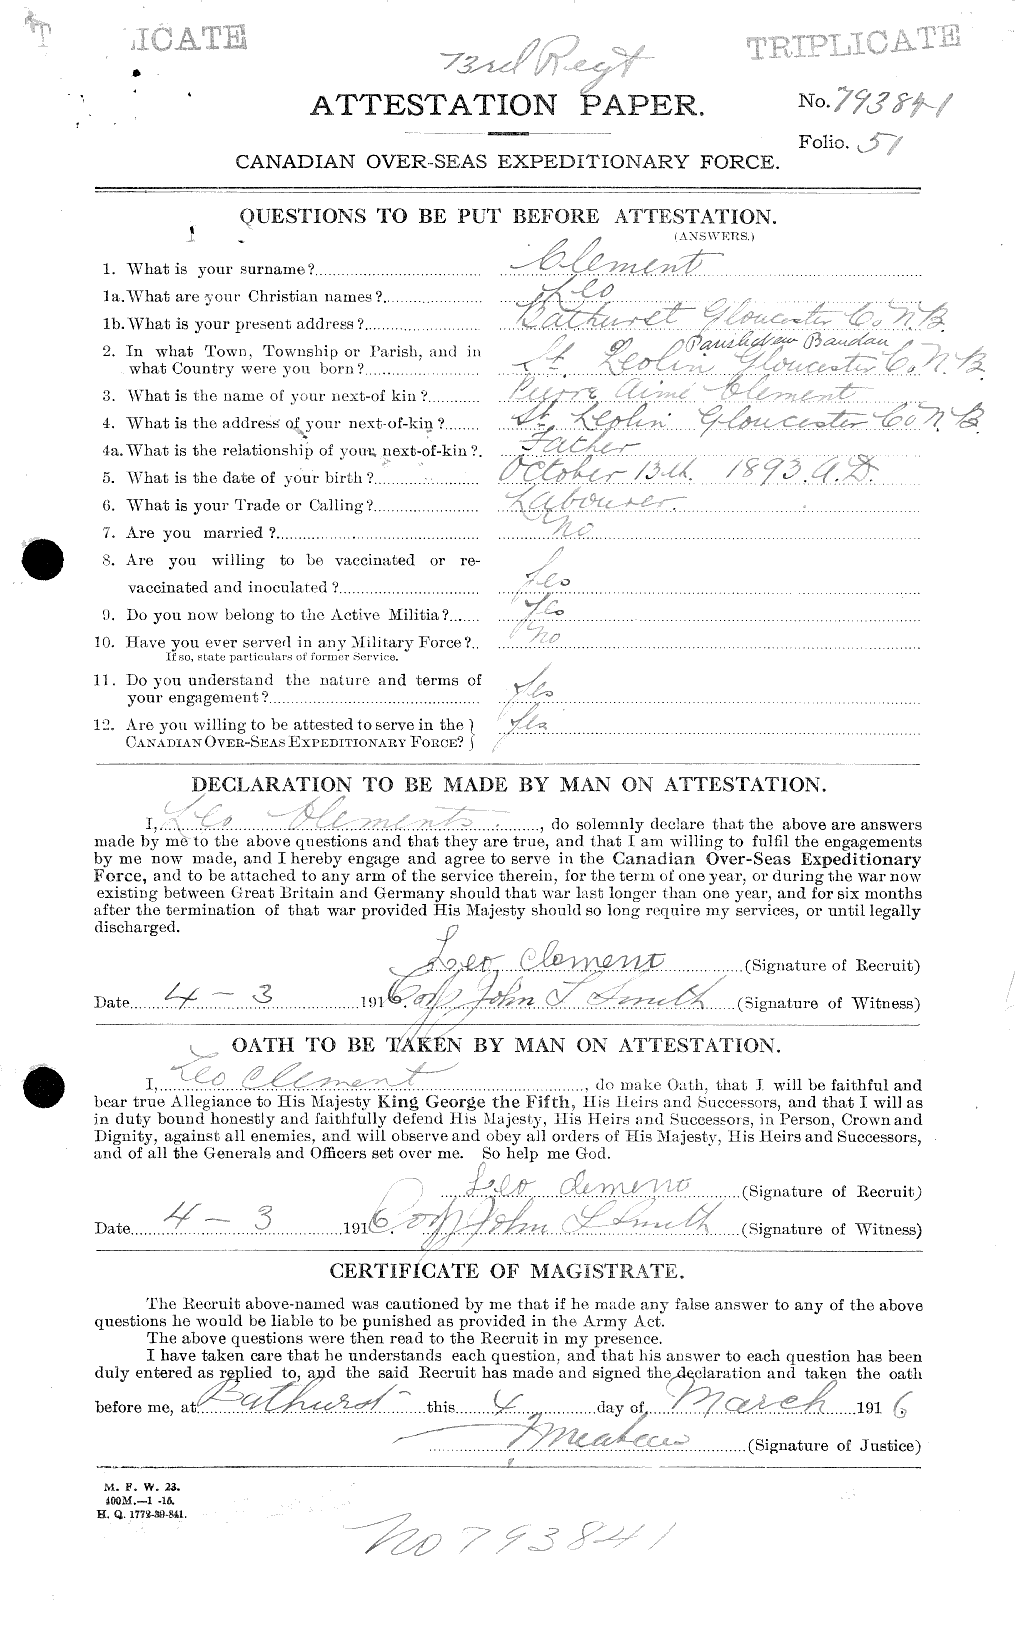 Personnel Records of the First World War - CEF 023883a